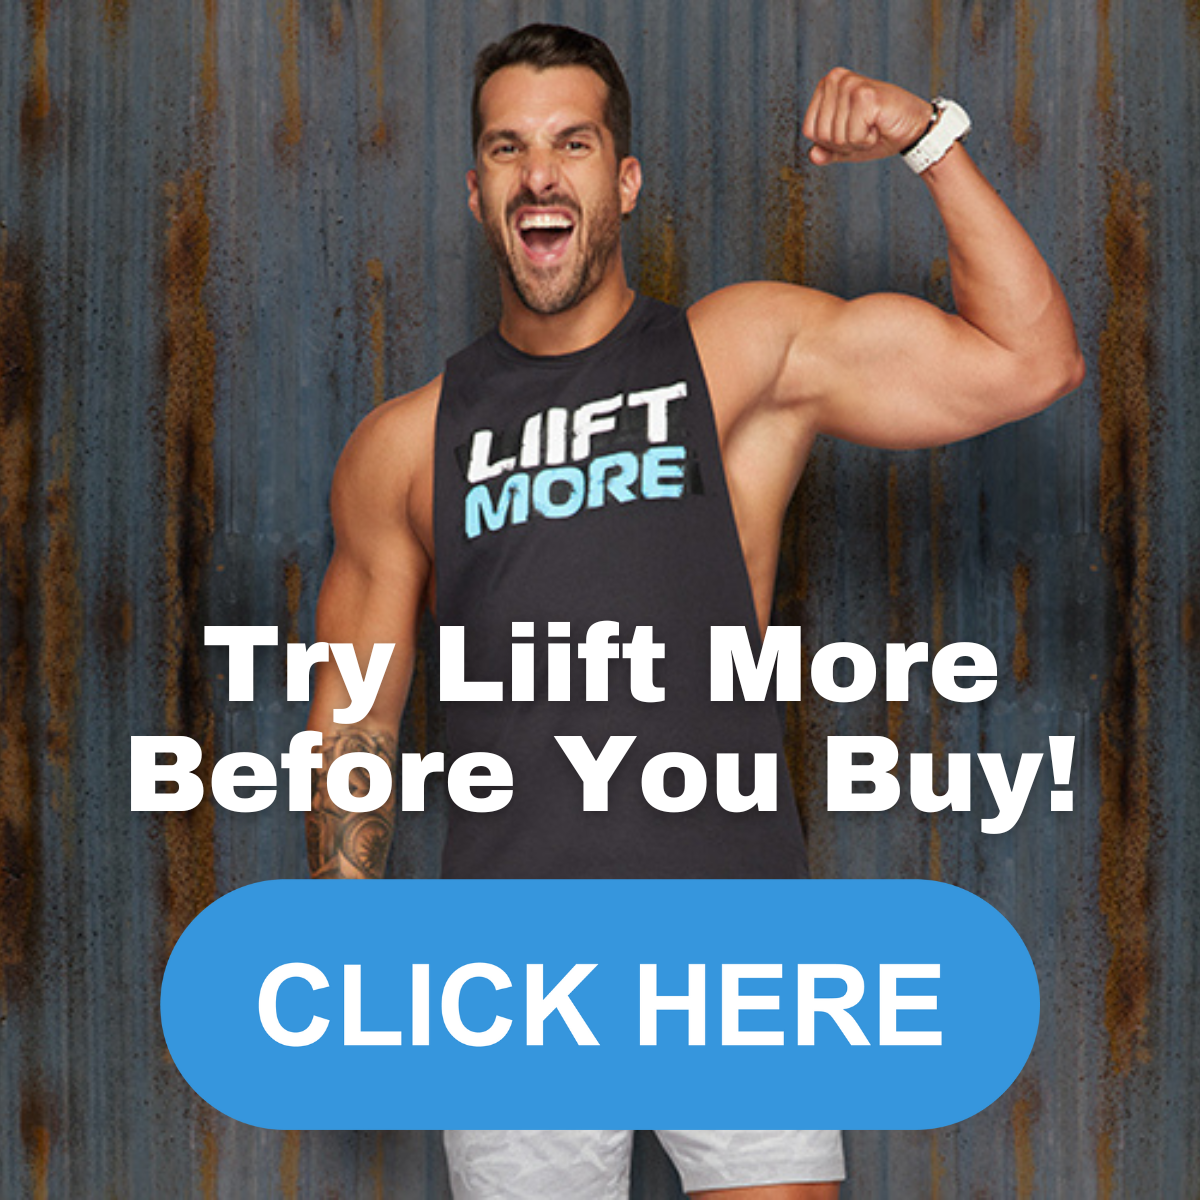 LIIFT MORE REVIEW Results Calendar Workout Breakdown Healthy For